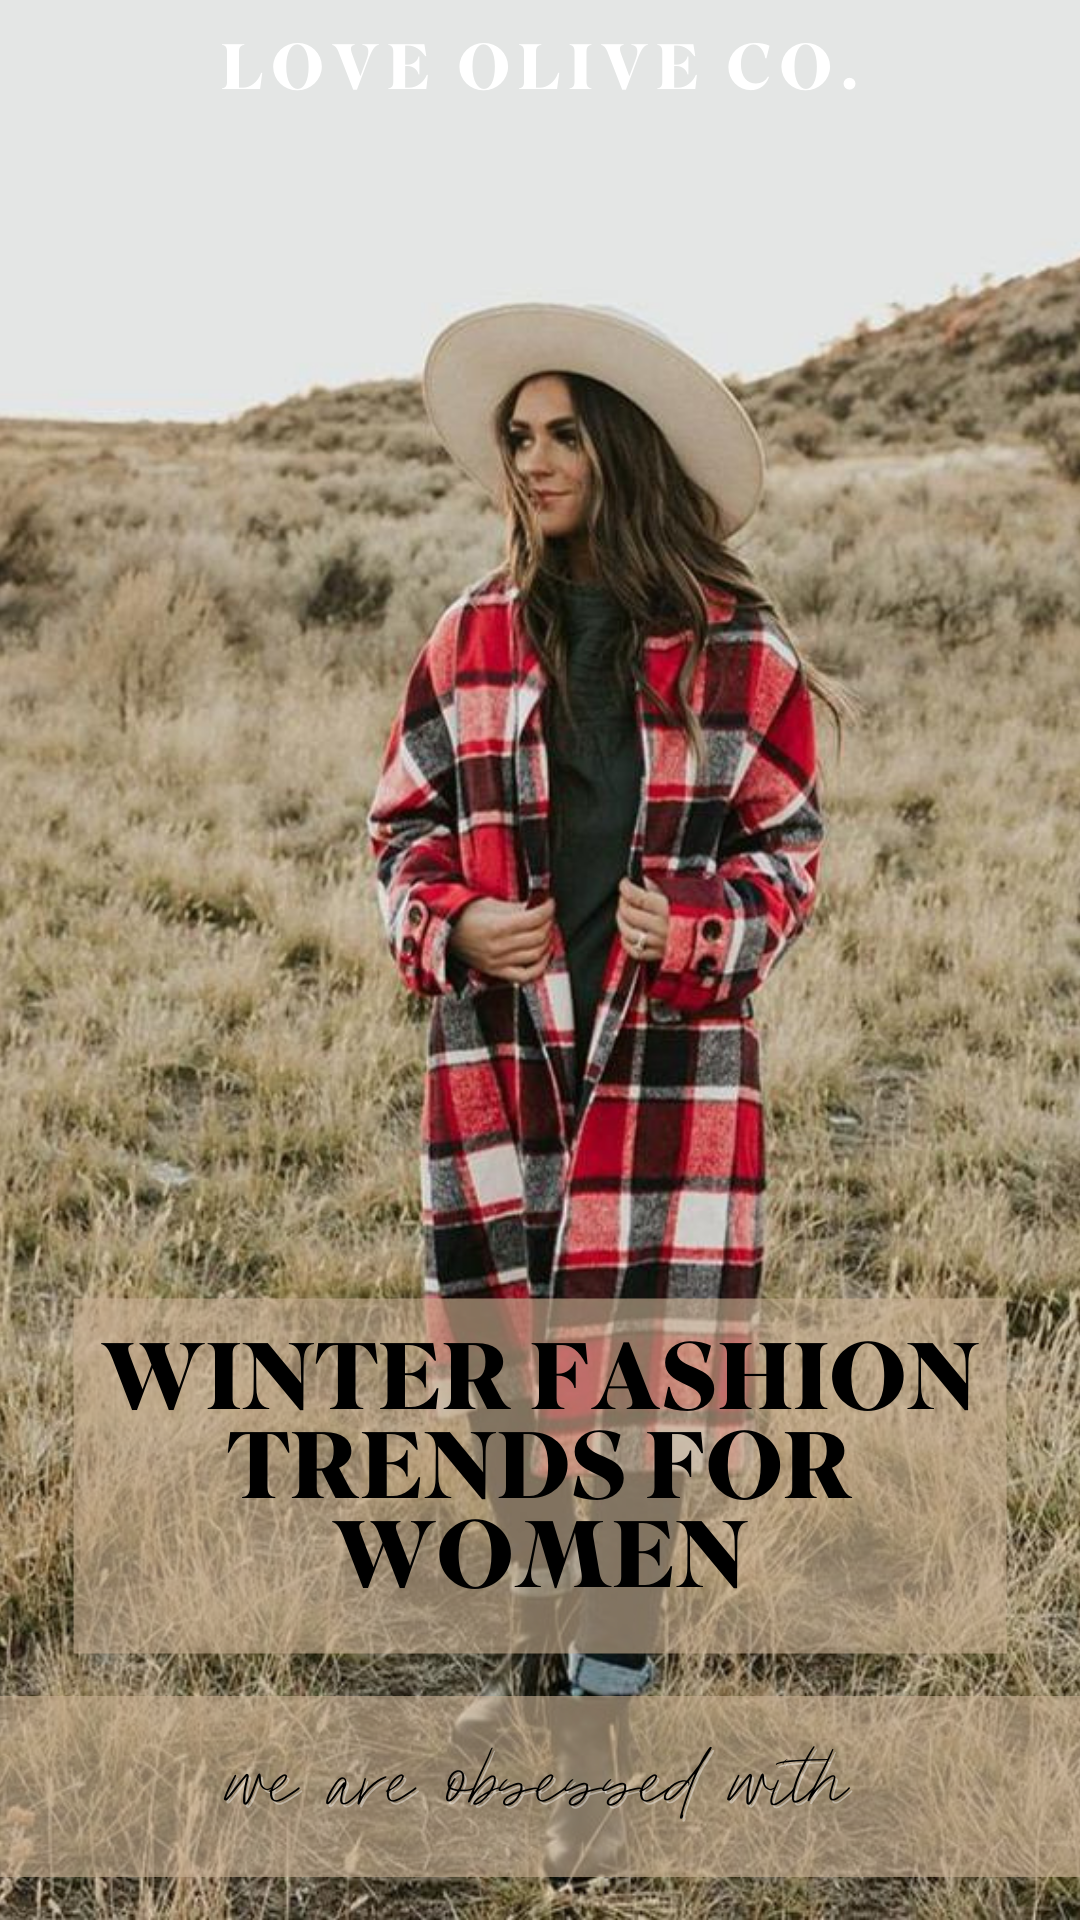 winter fashion trends for women we are obsessed with. www.loveoliveco.com